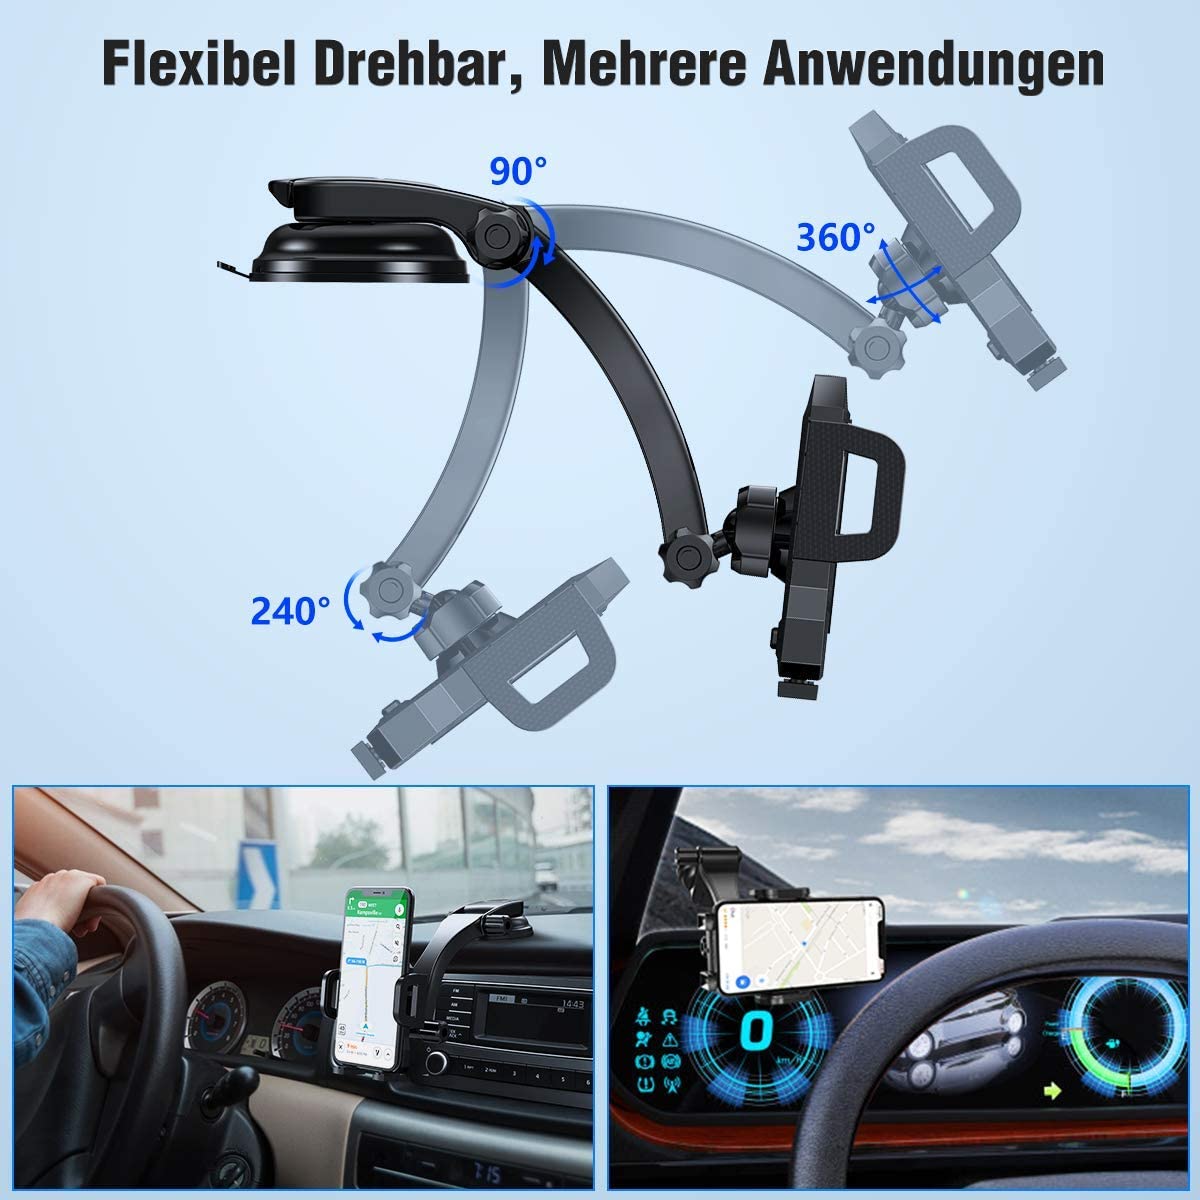 Miracase mobile phone holder car mobile phone holder for the car with suction cup Universal car smartphone holder dashboard mobile phone holder for iPhone SE 2020/11 / Samsung S20 / S10 / Note10